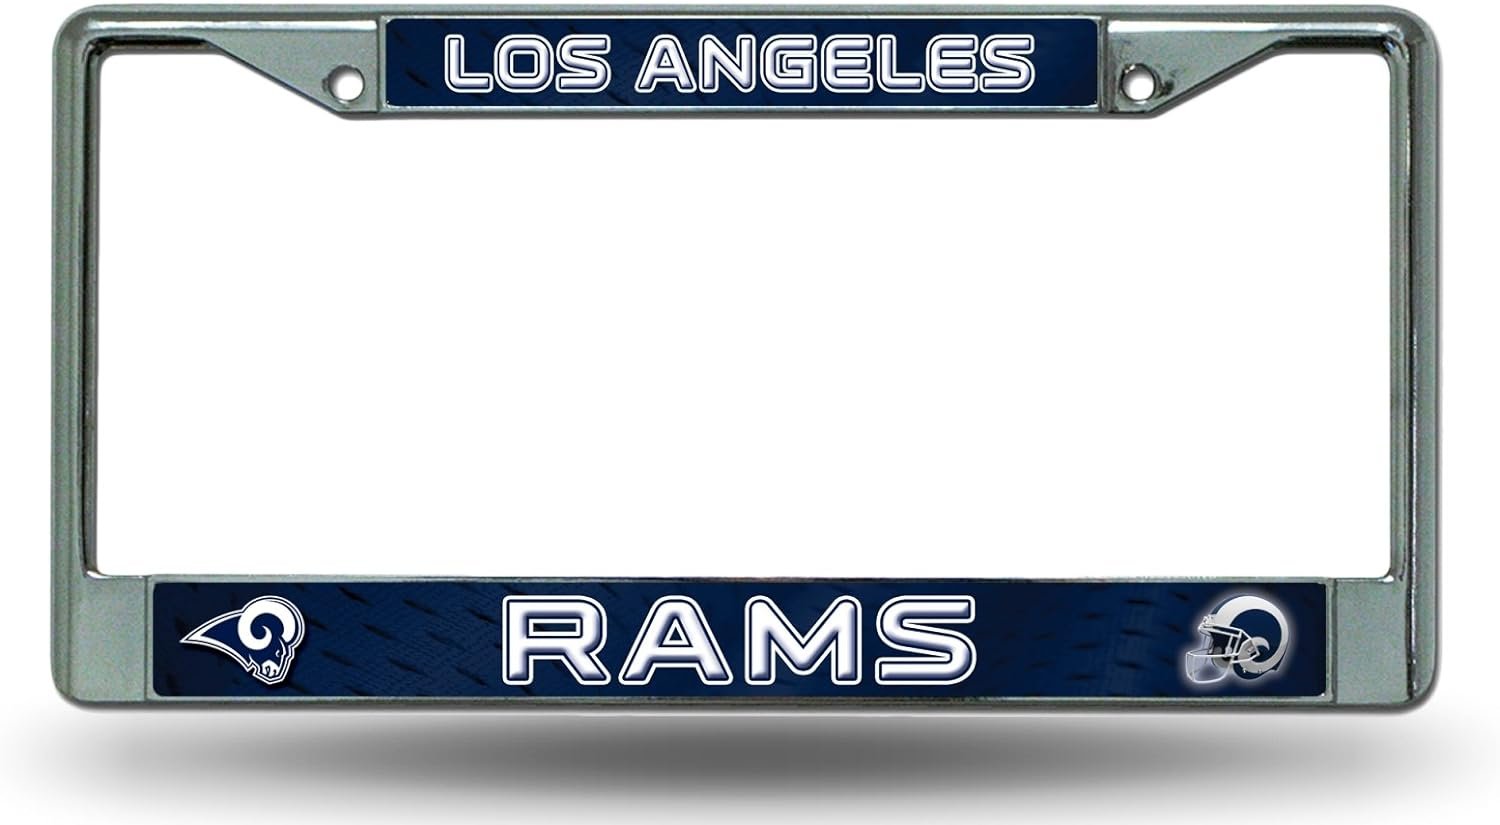 Los Angeles Rams Chrome Metal License Plate Frame Tag Cover, 12x6 Inch, Blue and White Logo